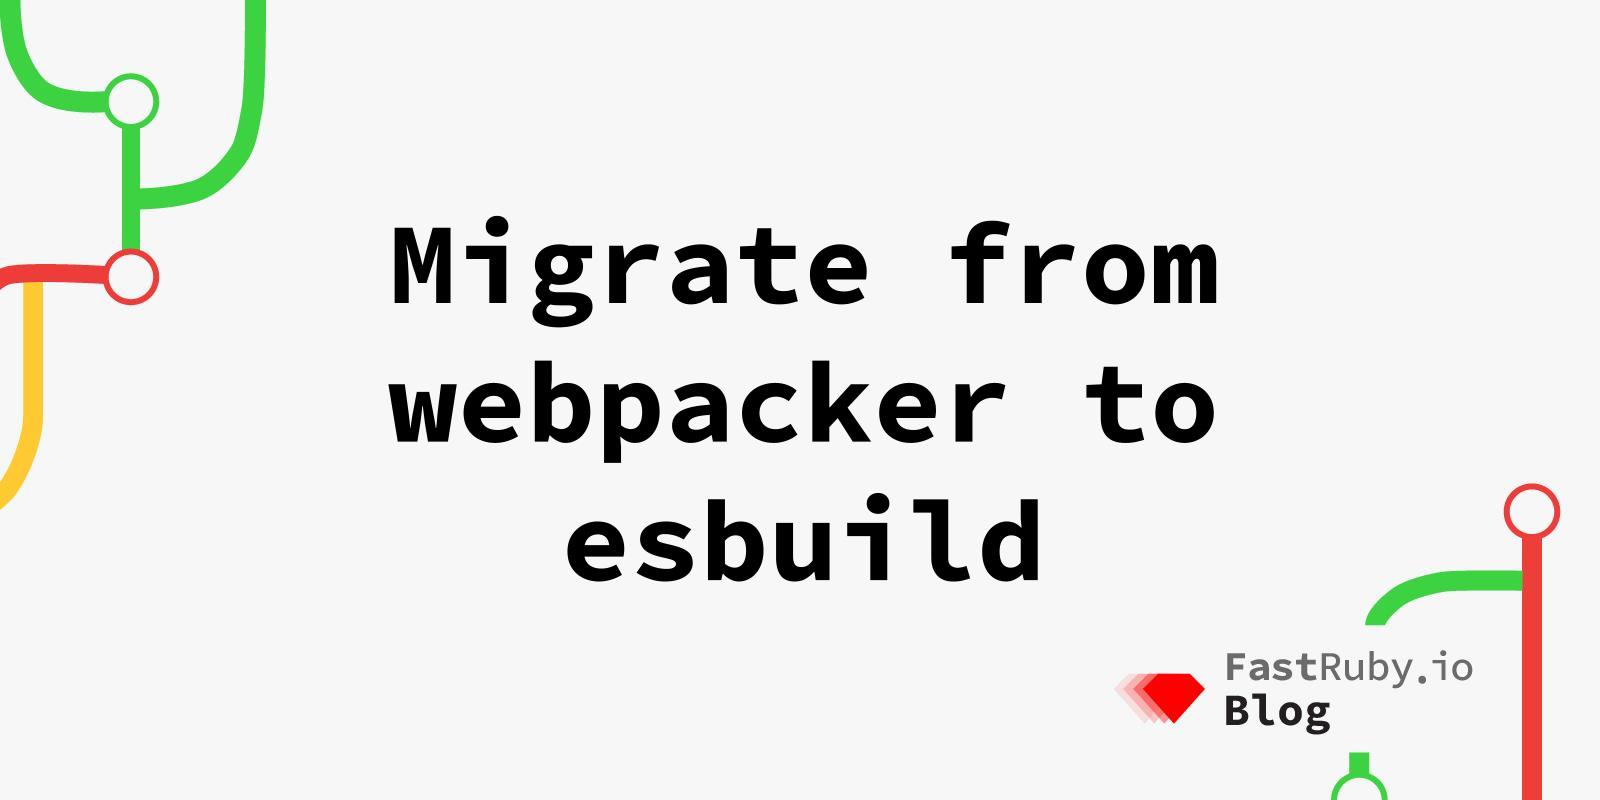 Migrate from webpacker to esbuild